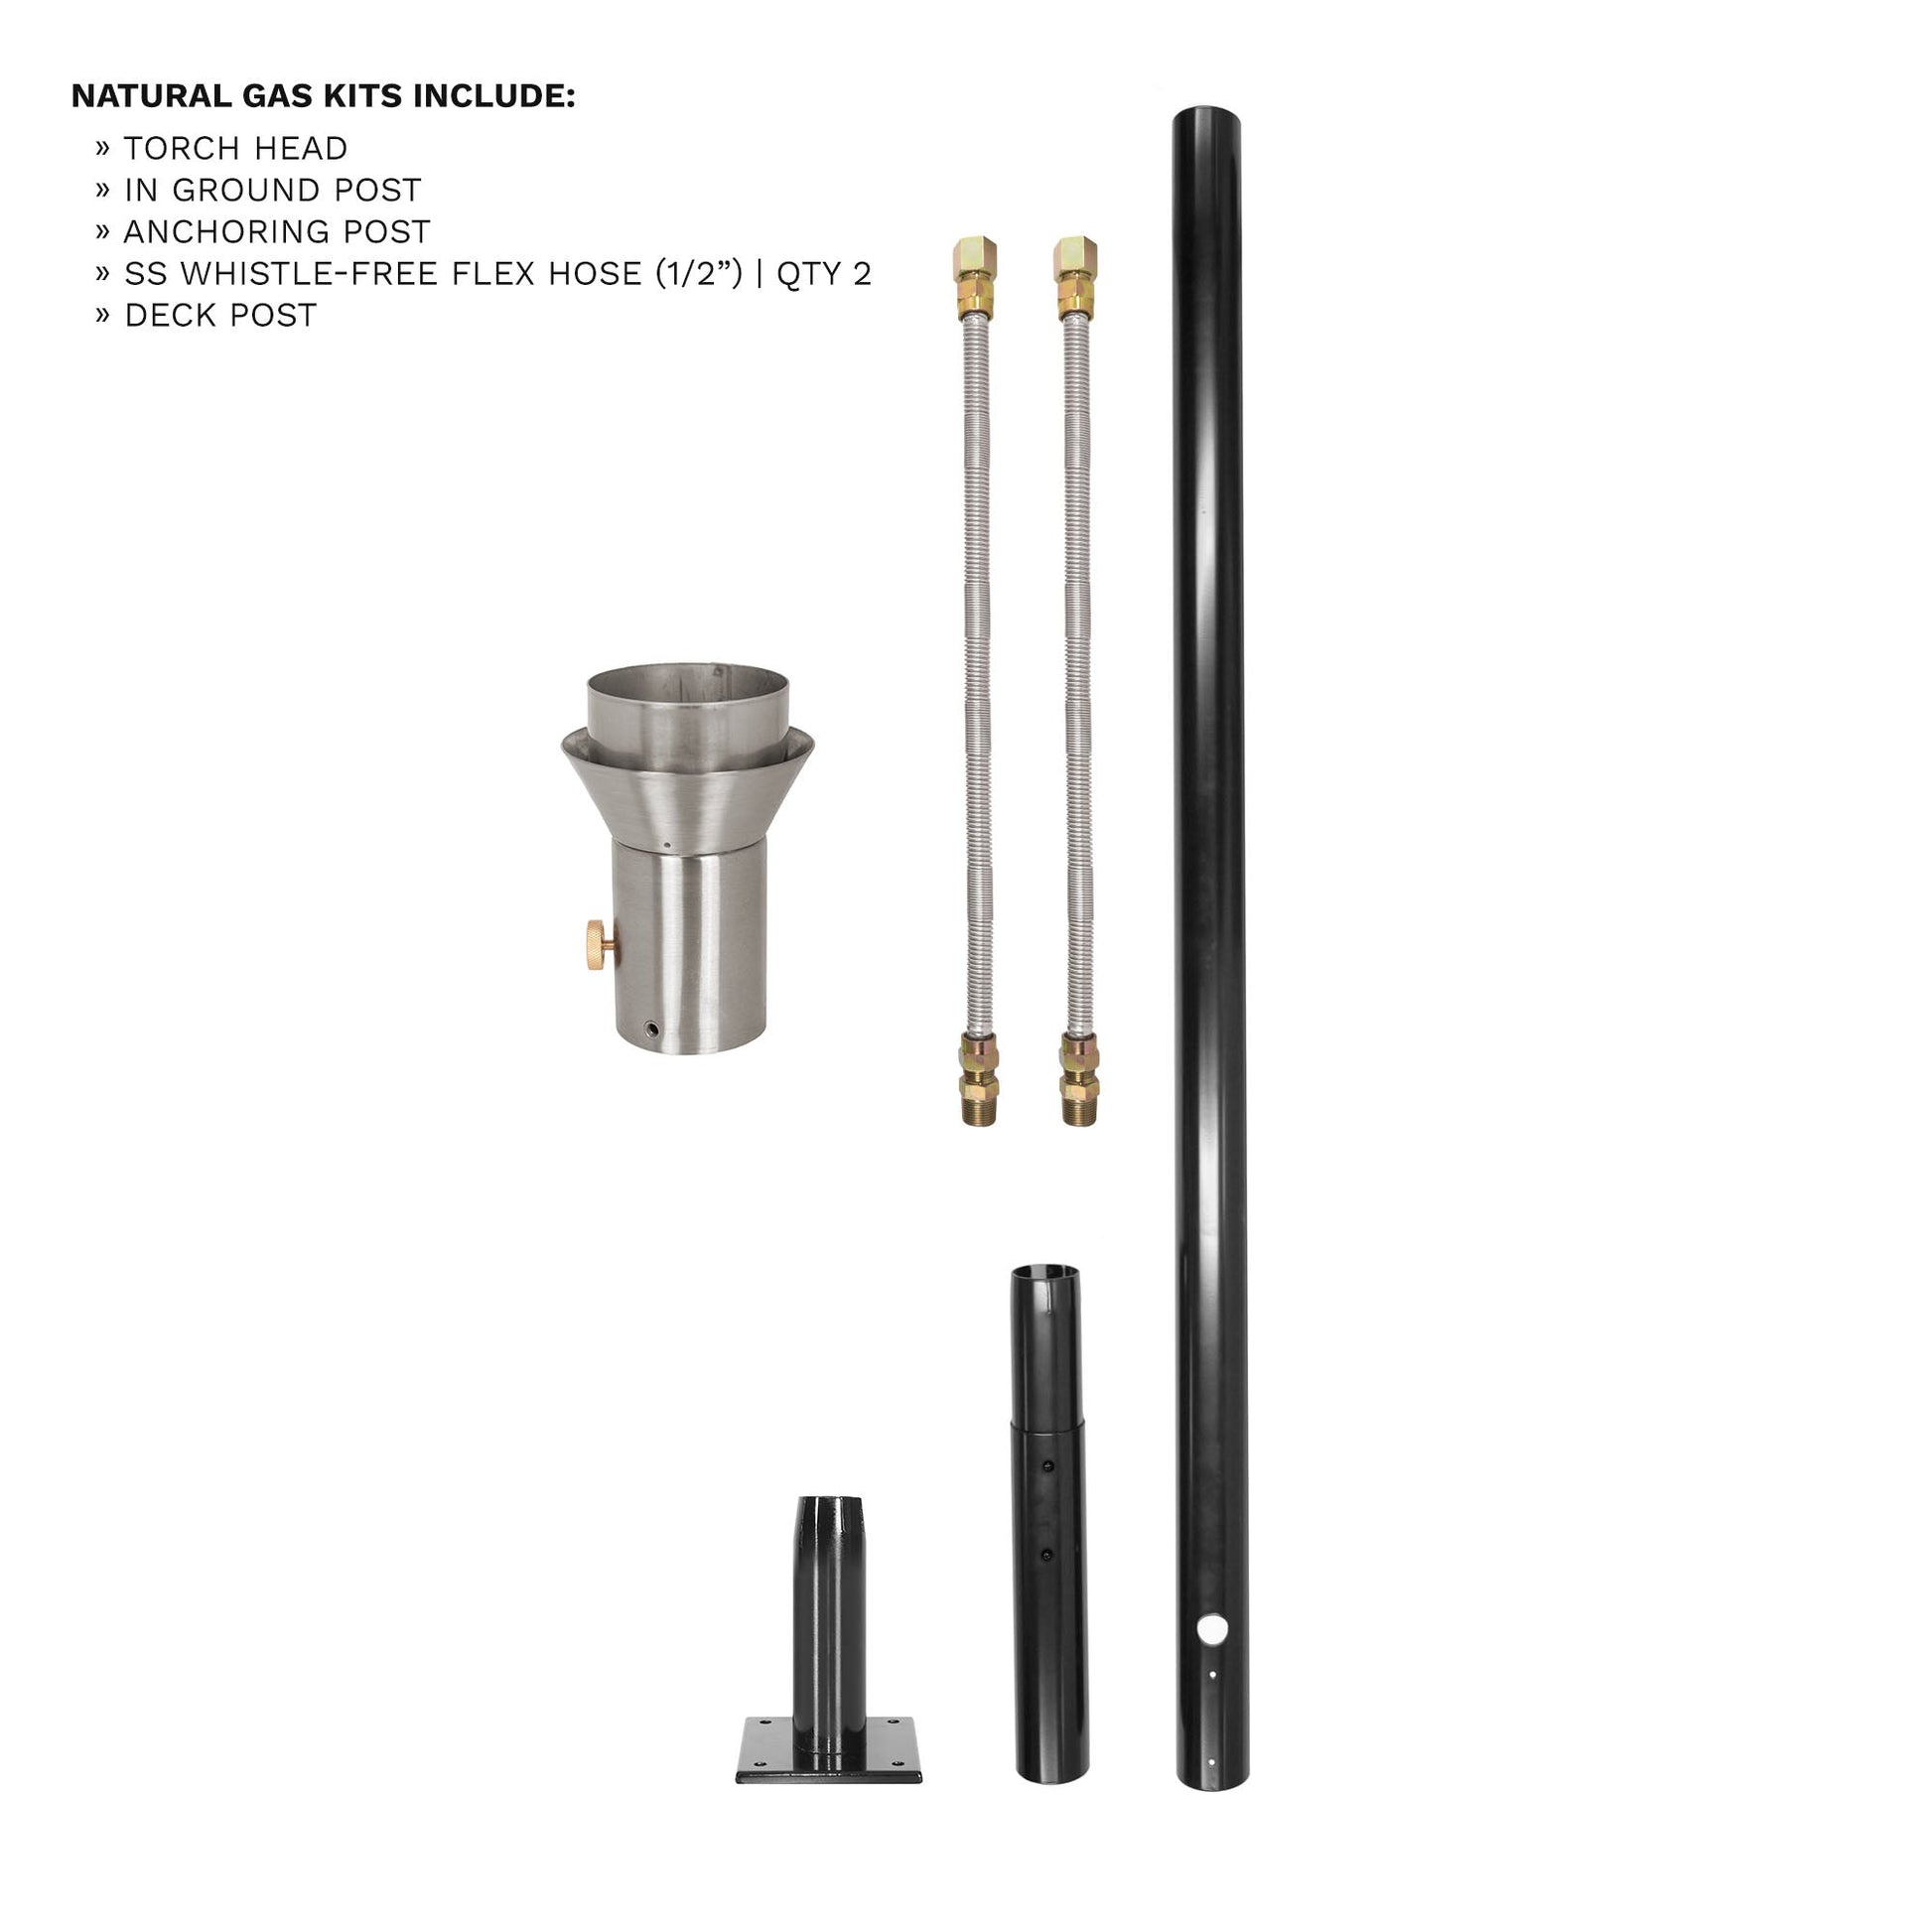 Honeycomb Original TOP Torch & Post Complete Kit - Stainless Steel - Natural Gas-Novel Home